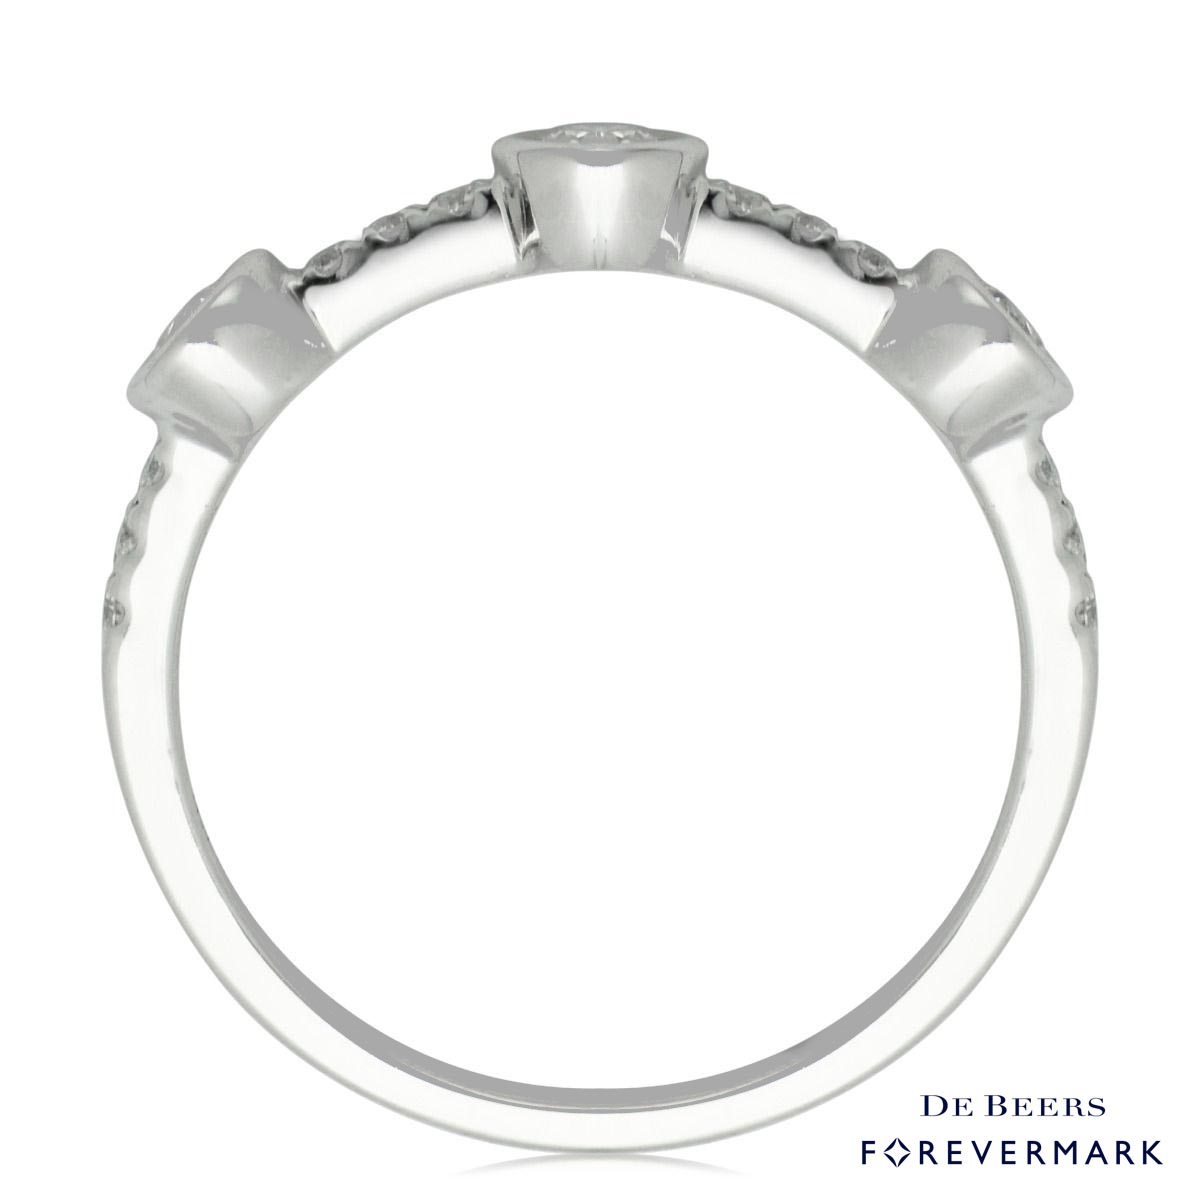 De Beers Forevermark Tribute Collection Diamond Stackable Ring in 18kt White Gold (3/8ct tw)